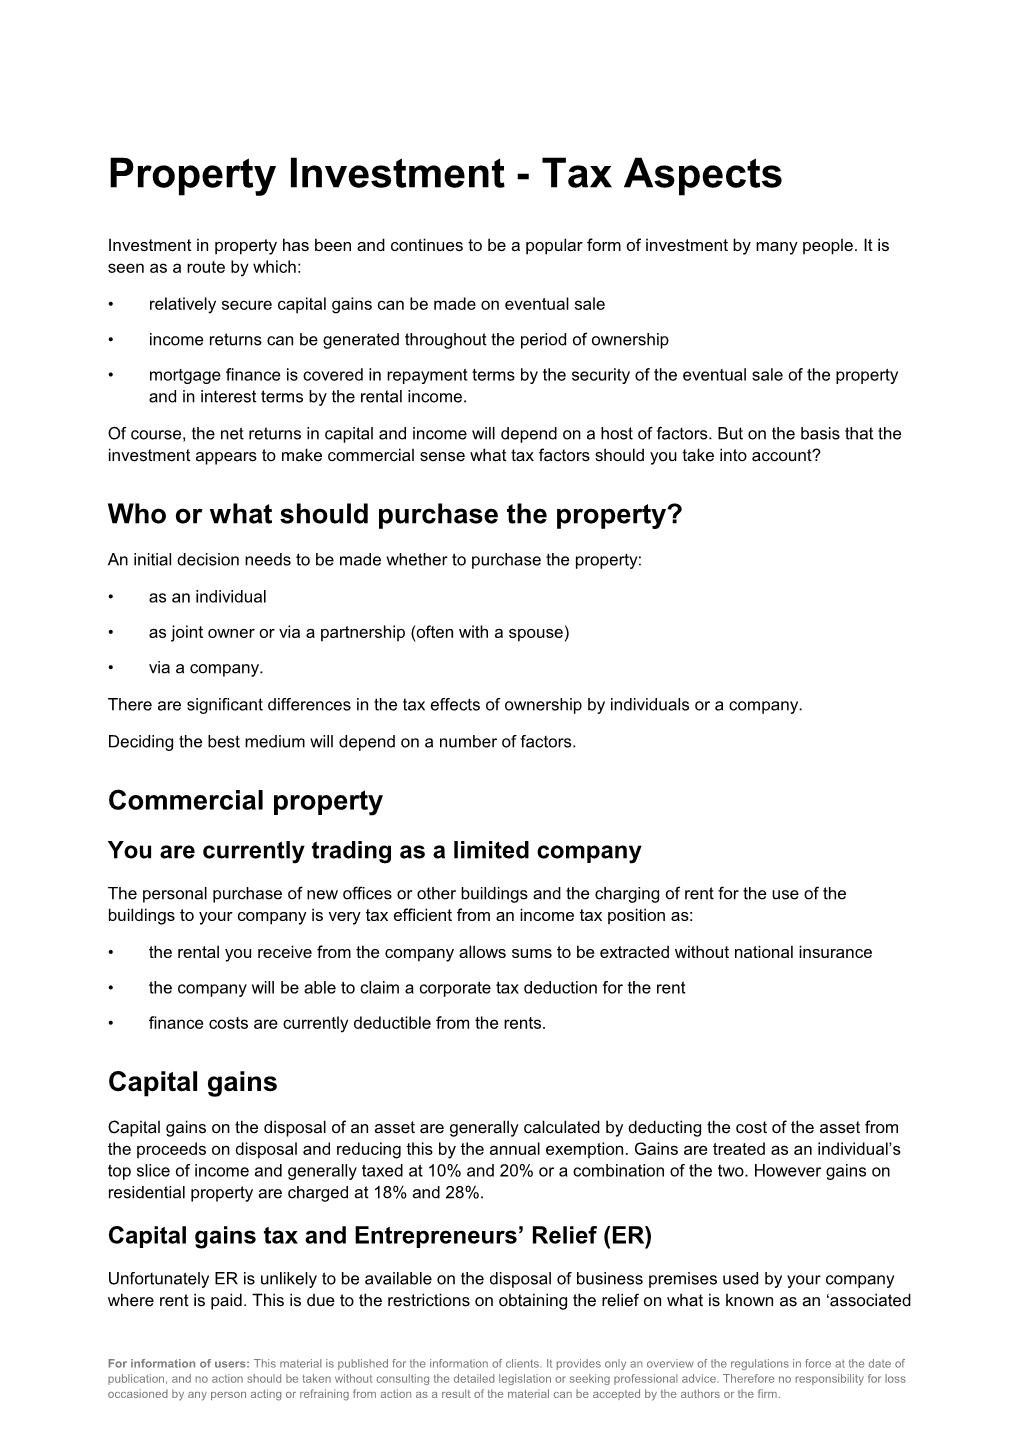 Property Investment - Tax Aspects